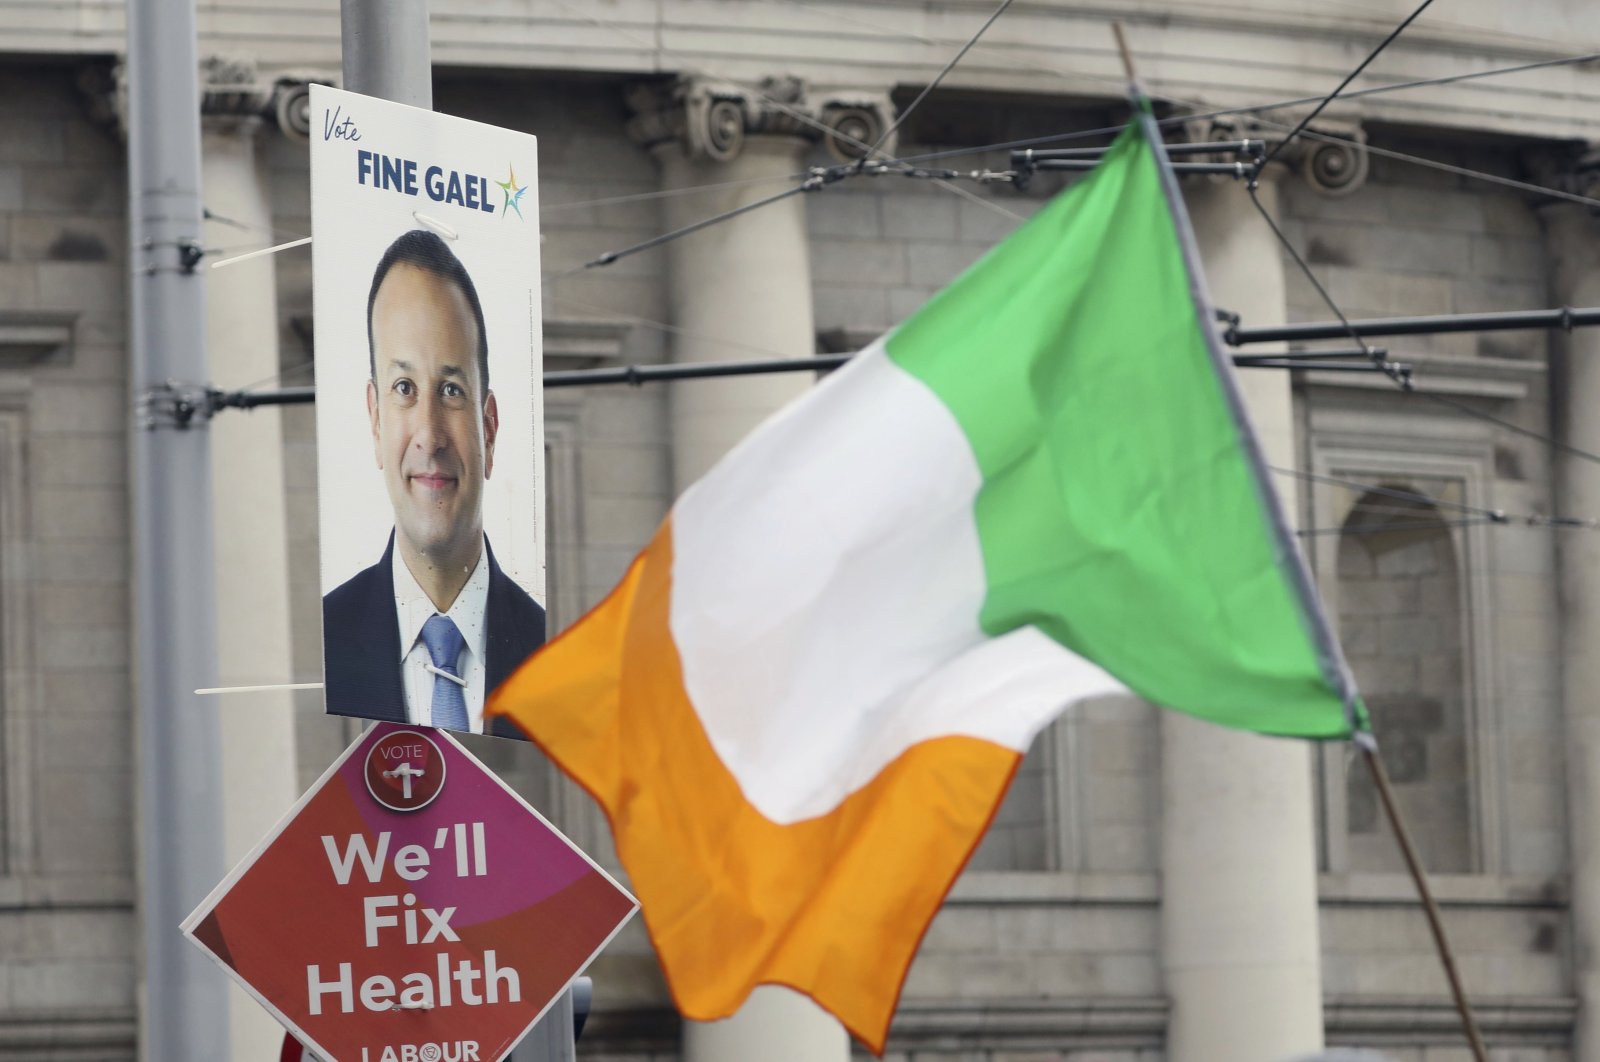 Election posters are displayed on lampposts in Dublin, Ireland, Feb. 7, 2020. (AP Photo)